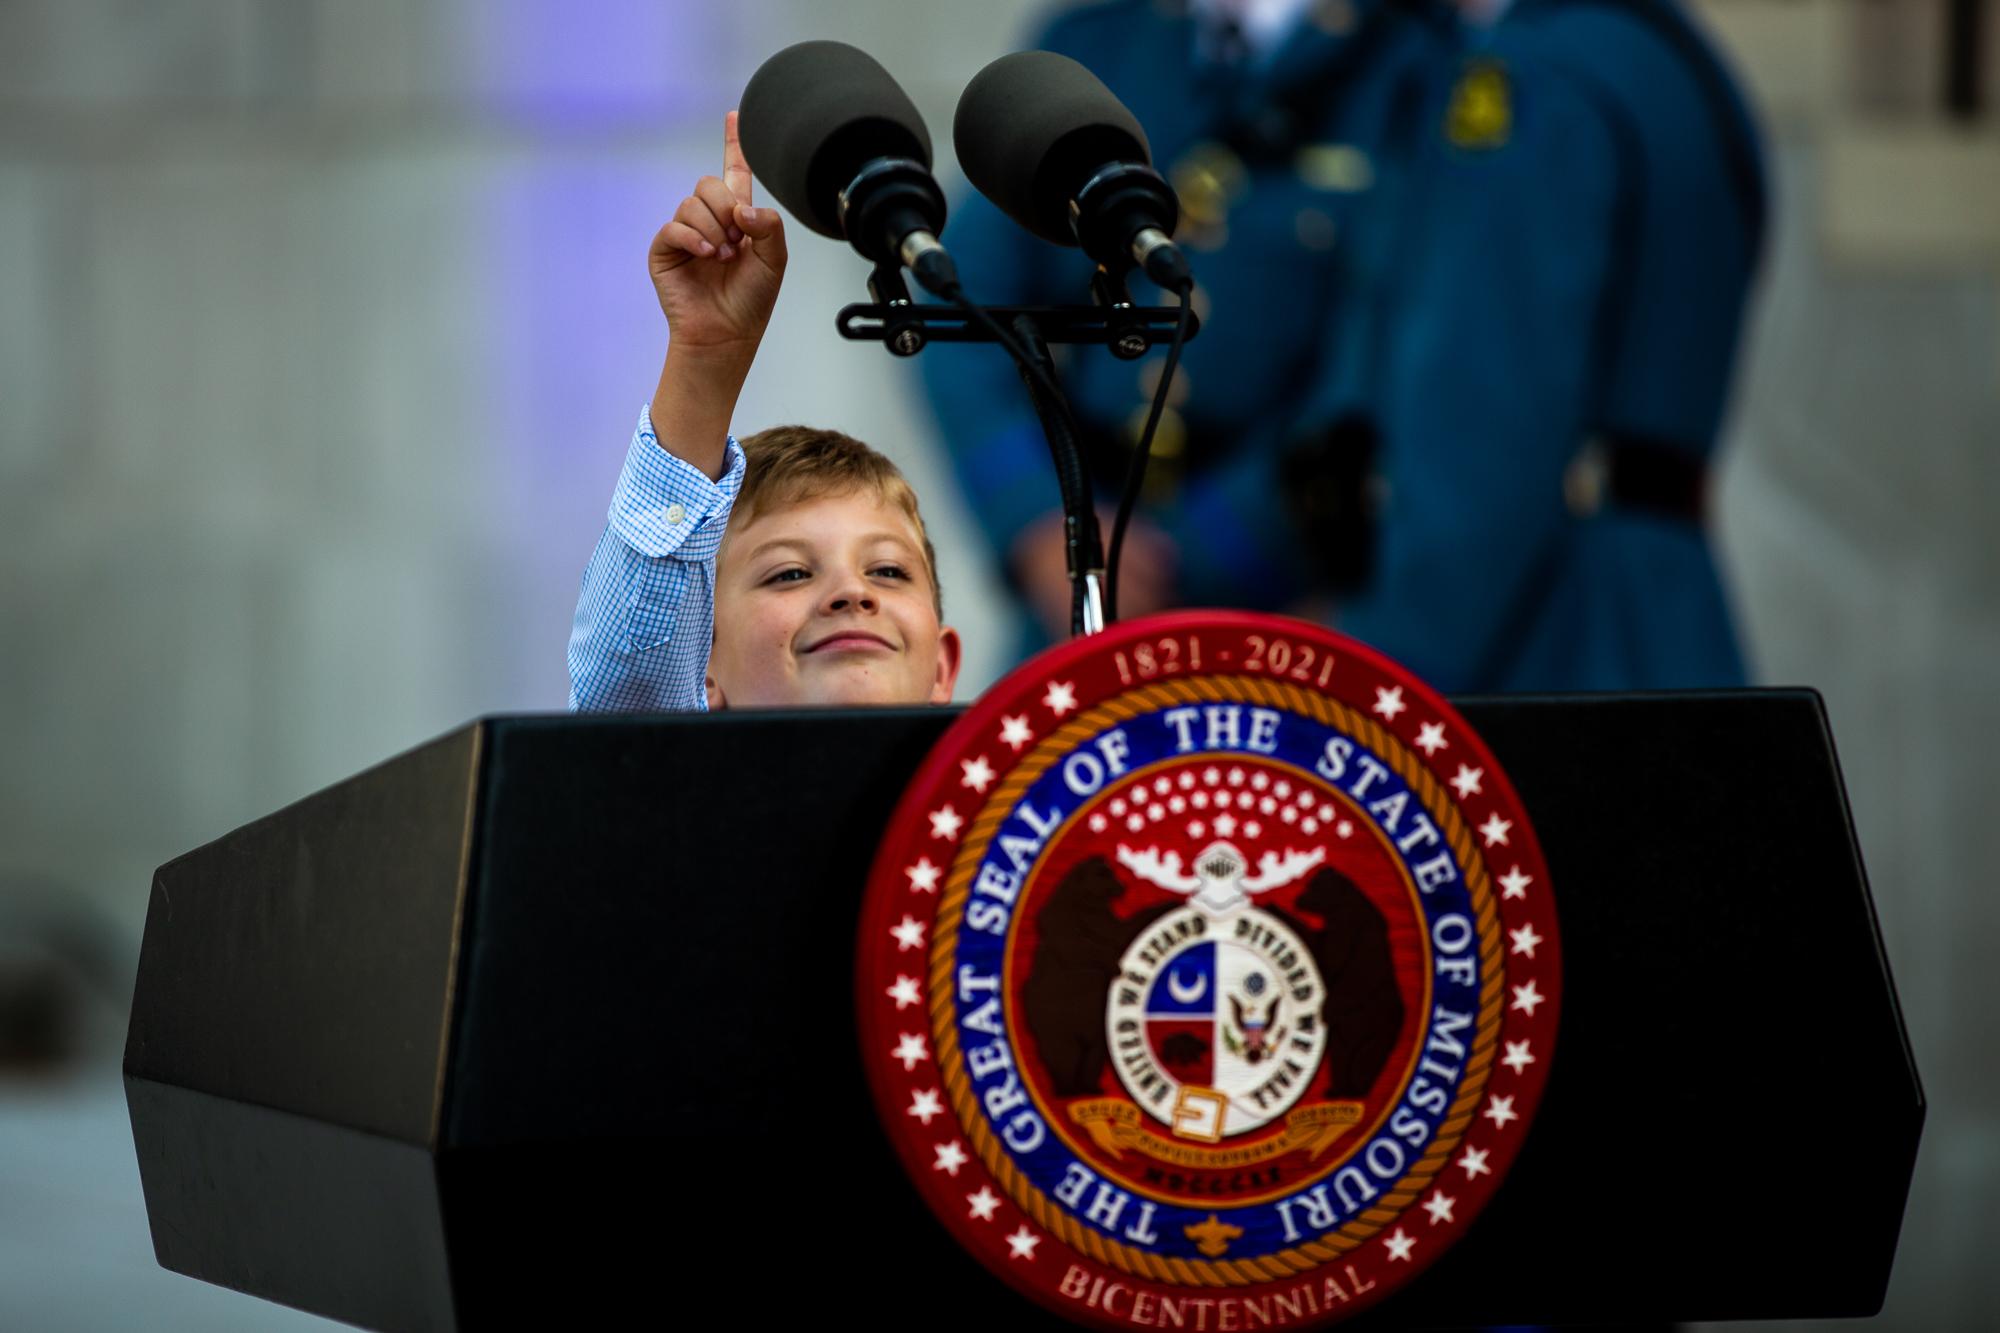 Hunter Chapman, 9, reaches for the podium microphones ahead of the Missouri Bicentennial Ball on Saturday, September 18, 2021 in Jefferson City, Mo. &ldquo;He&rsquo;s a future president,&rdquo; his mom said.